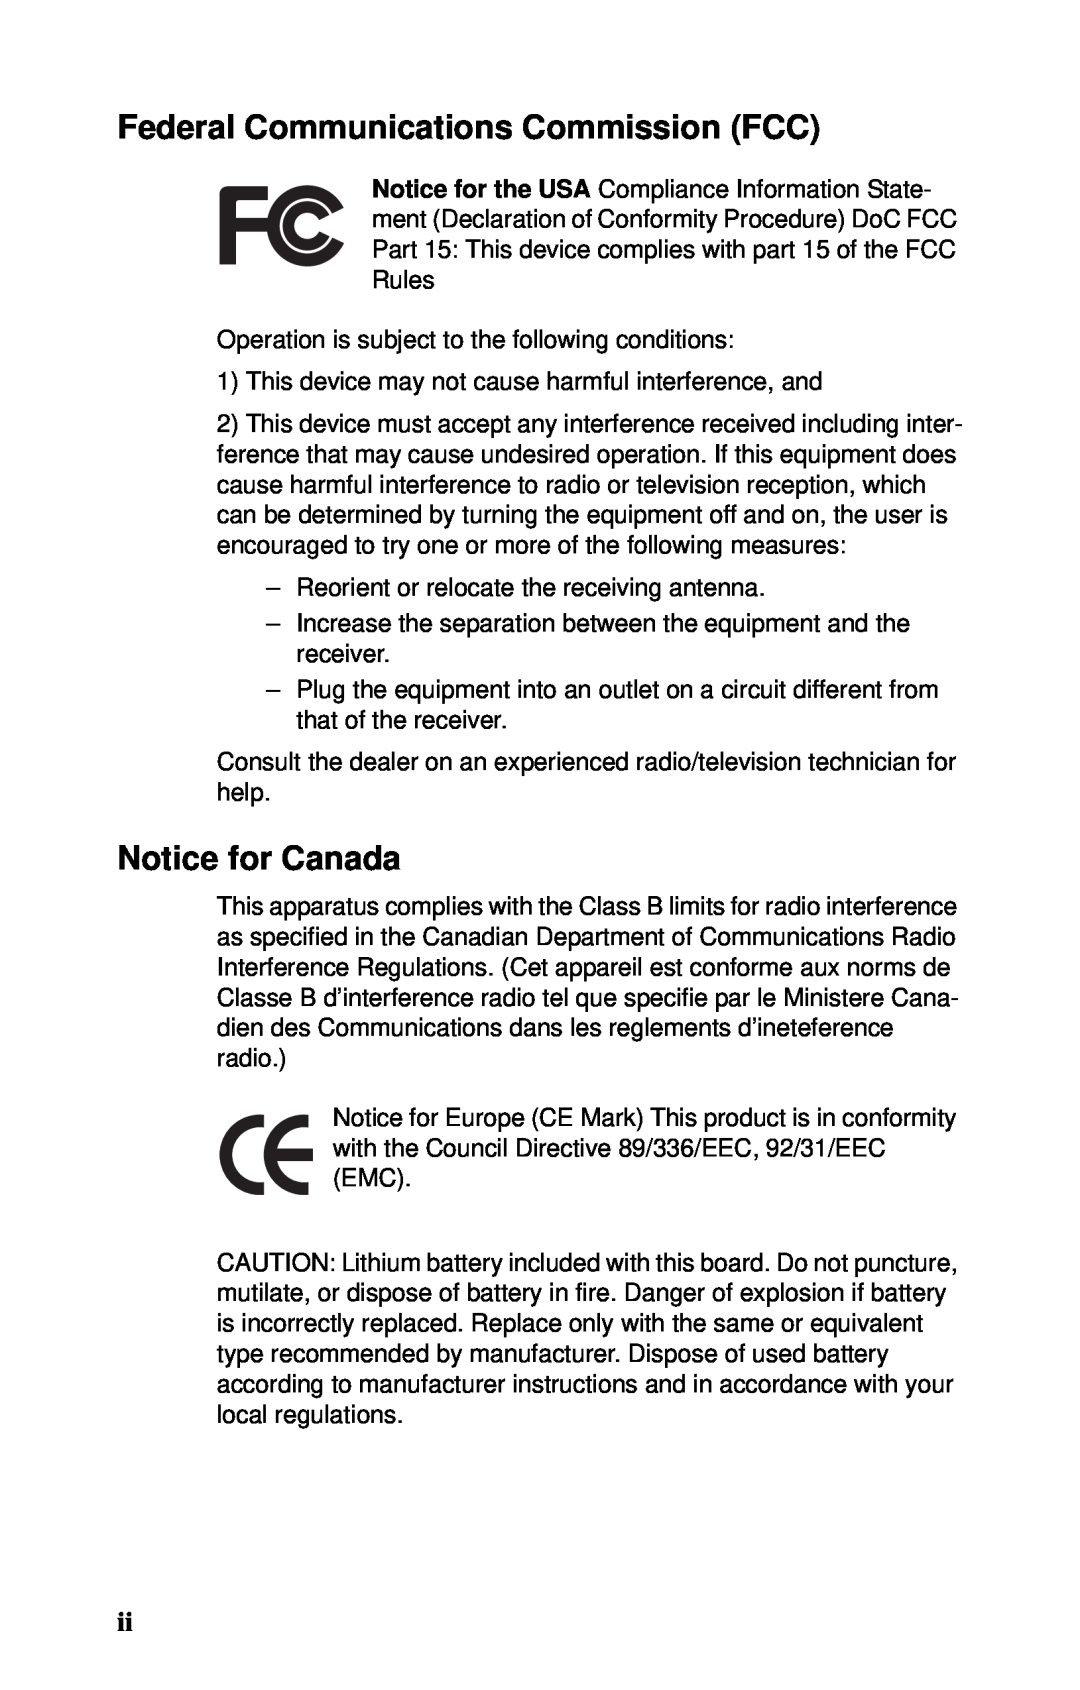 Tyan Computer B5102, GX21 manual Federal Communications Commission FCC, Notice for Canada 